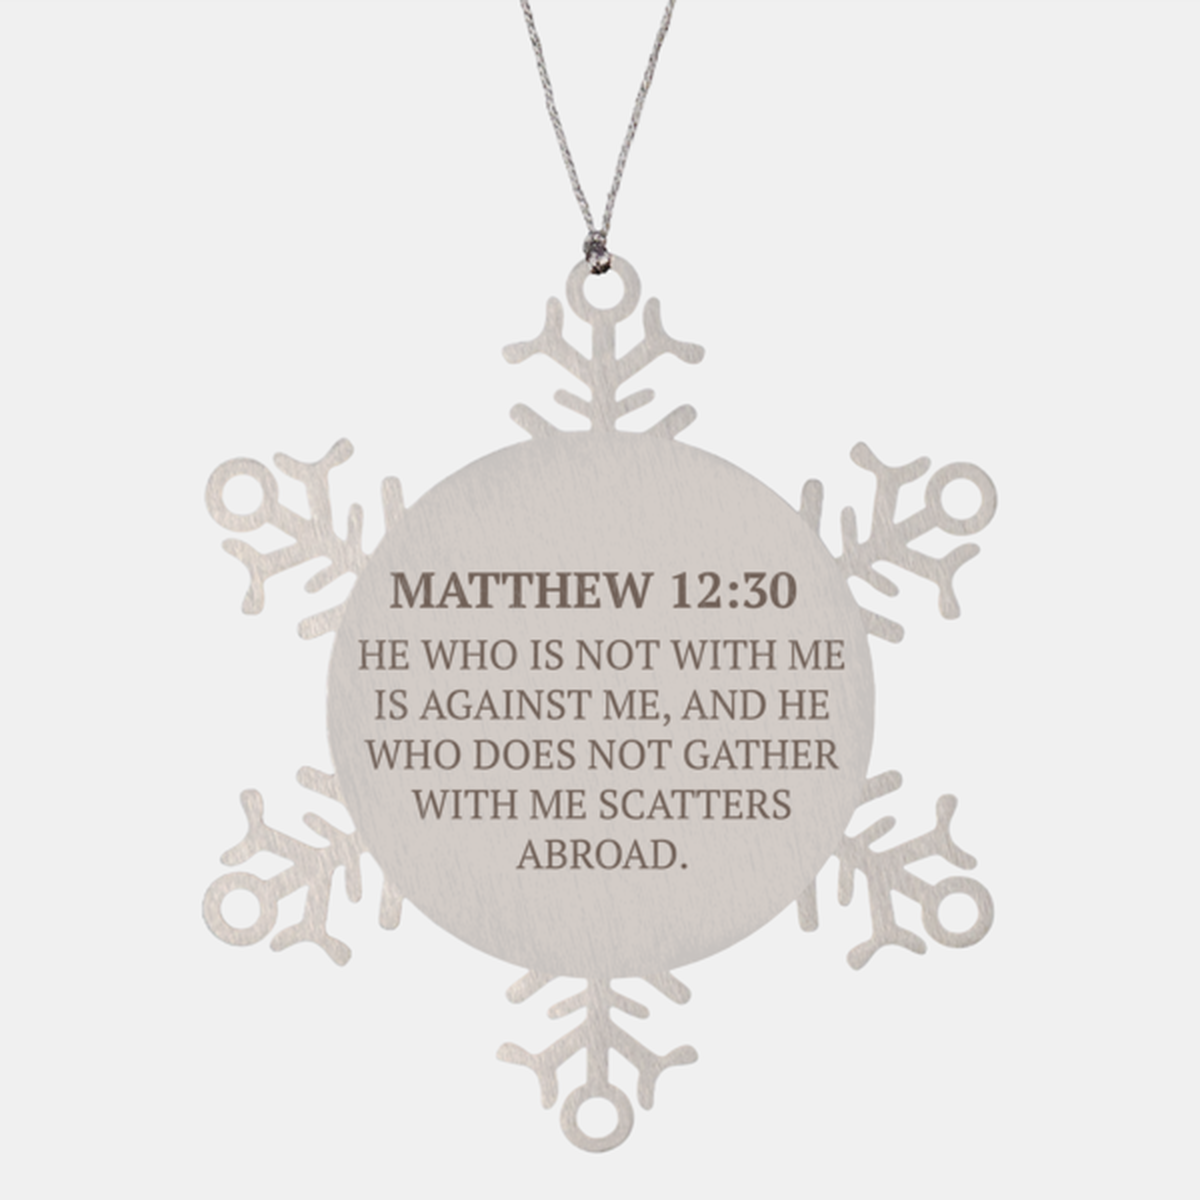 Christian Ornaments For Christmas Tree, He Who Is Not With Me Is Against Me, Religious Christmas Decorations, Scripture Ornaments Gifts, Bible Verse Ornament